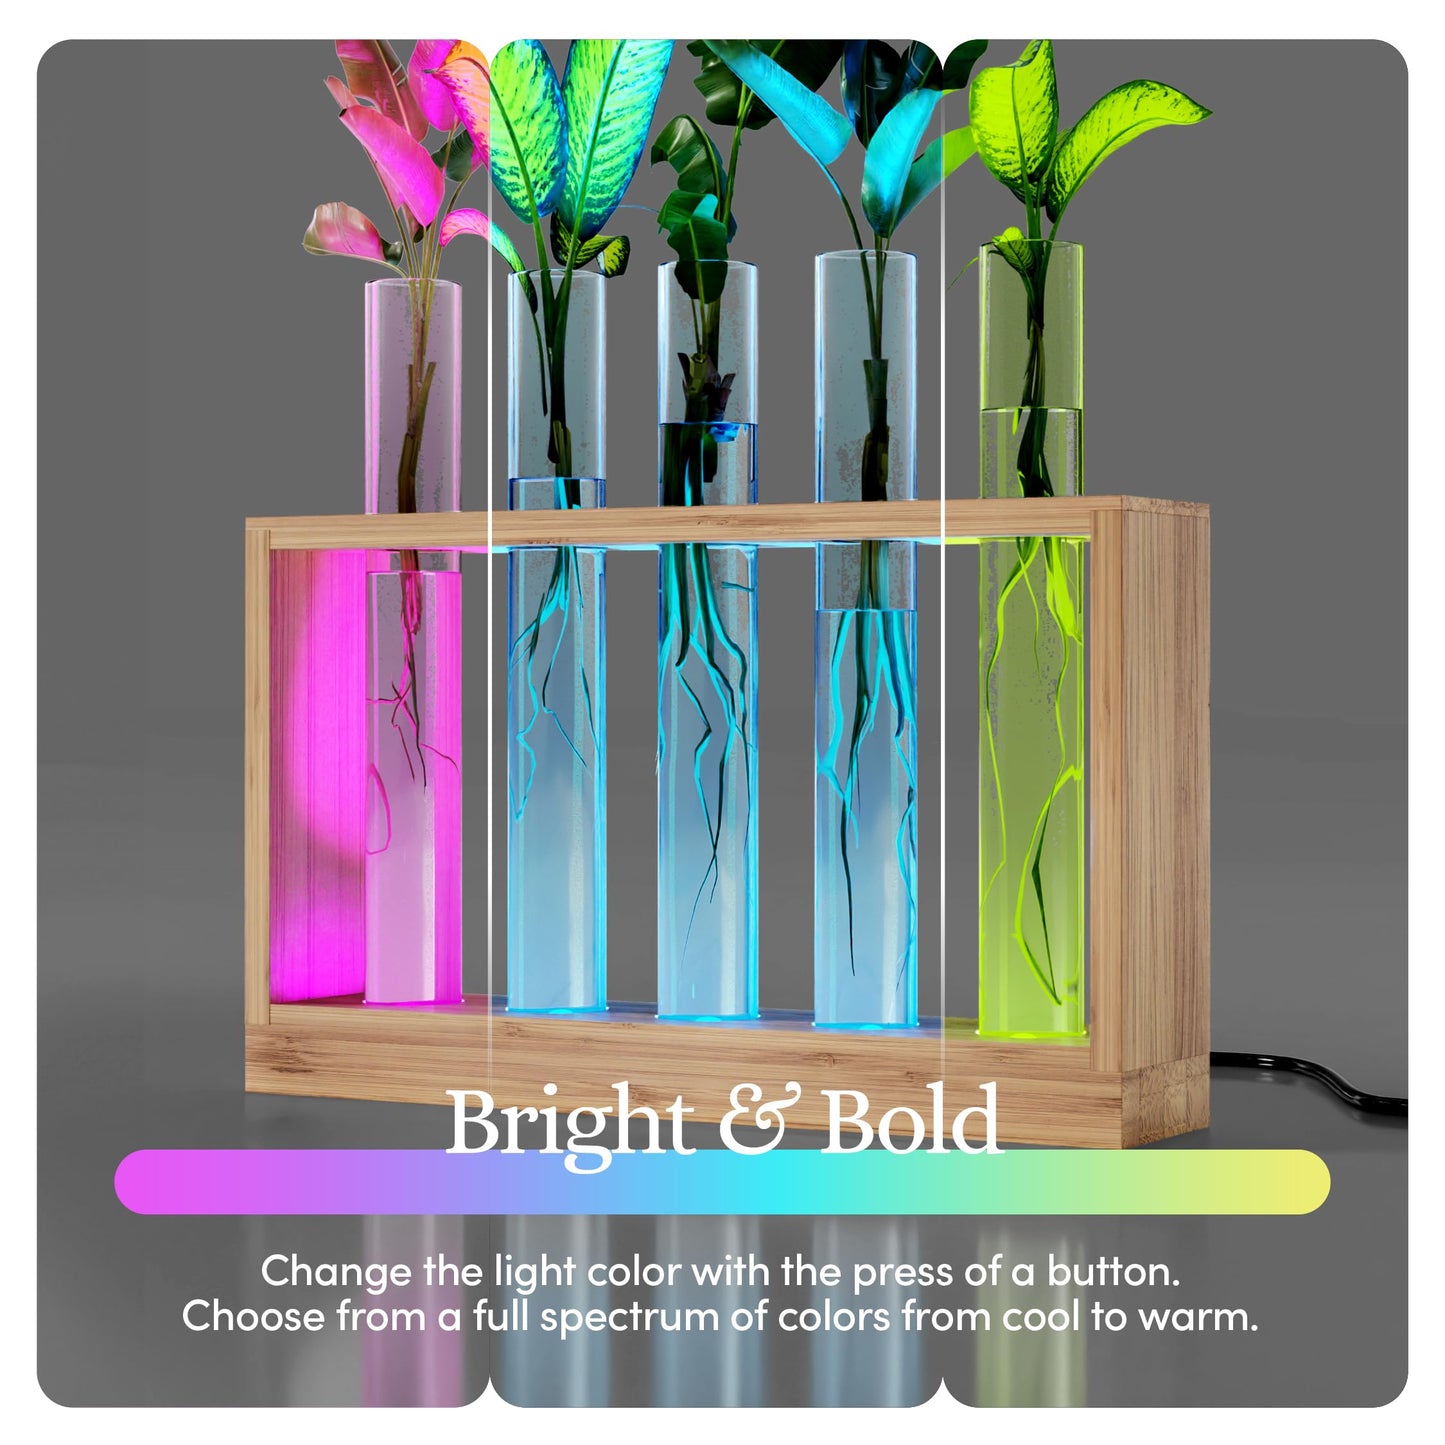 Light Up Bamboo Vial Air Planter - Plant Lover Easter Gifts for Women, Best Indoor Gardening House Warming Gift Ideas, Office New Home Decor, Mom, Grandma, Mothers Day, Friend, Birthday, Garden Plants